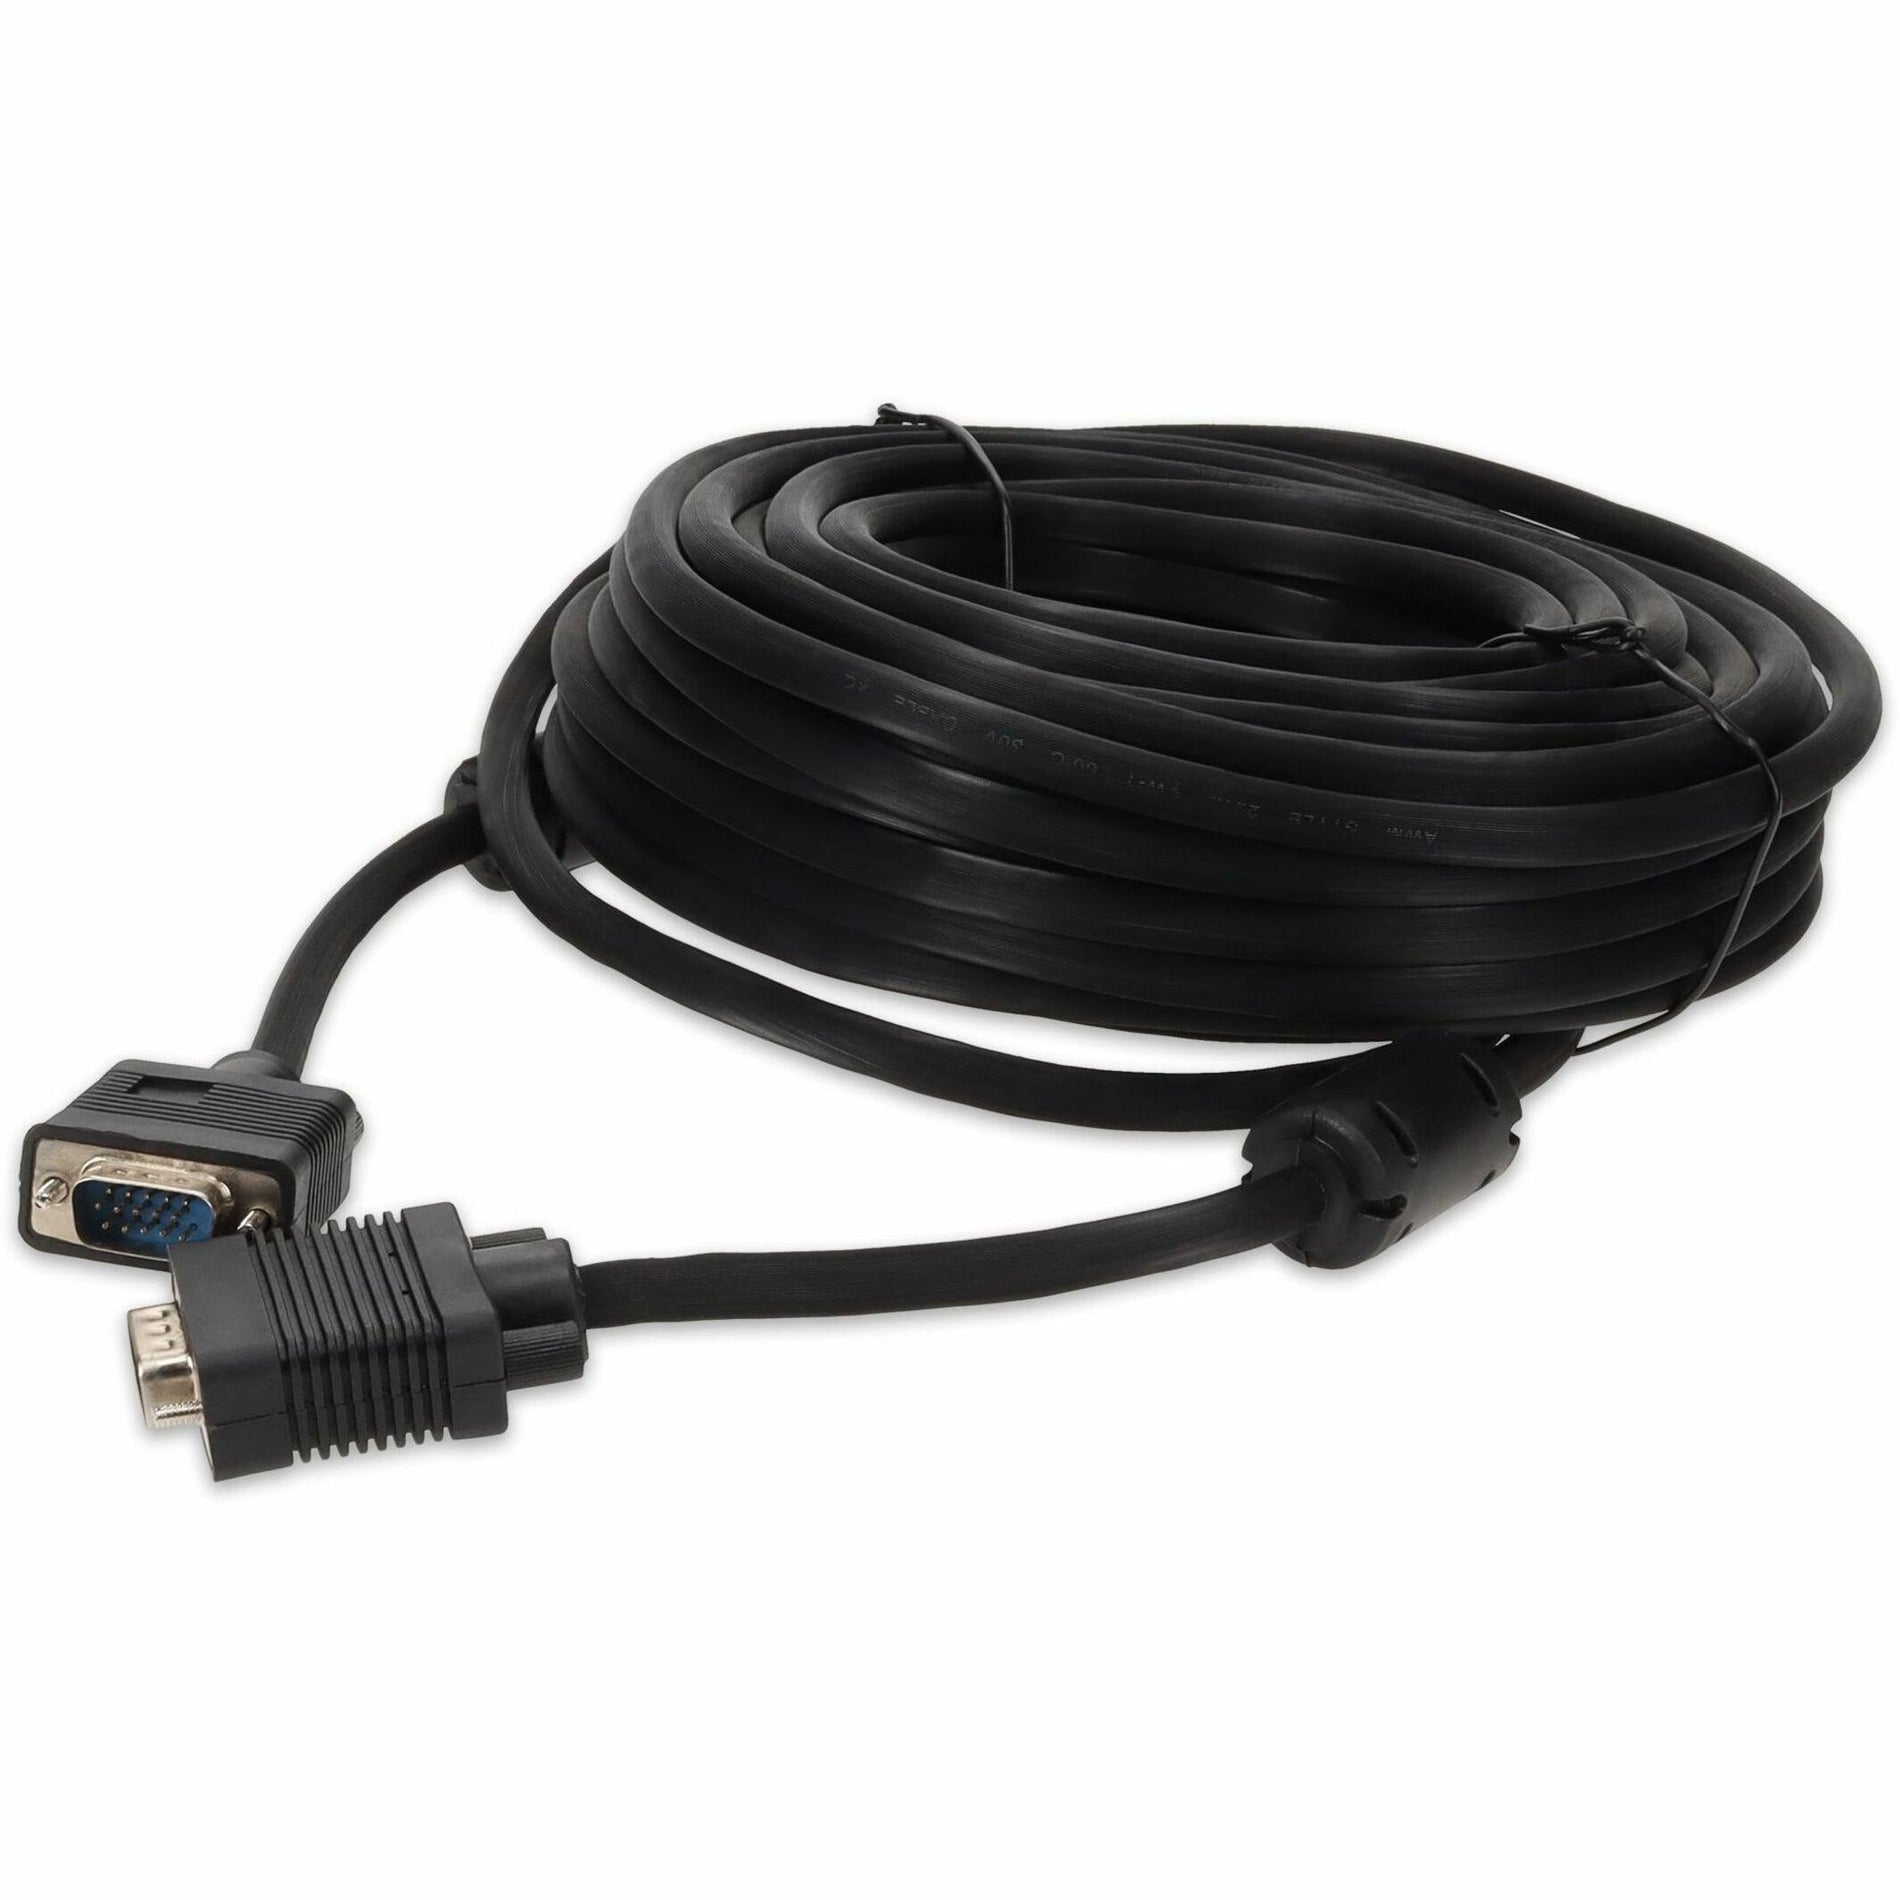 AddOn VGAMM50 50ft (15M) VGA High Resolution Monitor Cable - Male to Male, 3 Year Warranty, United States